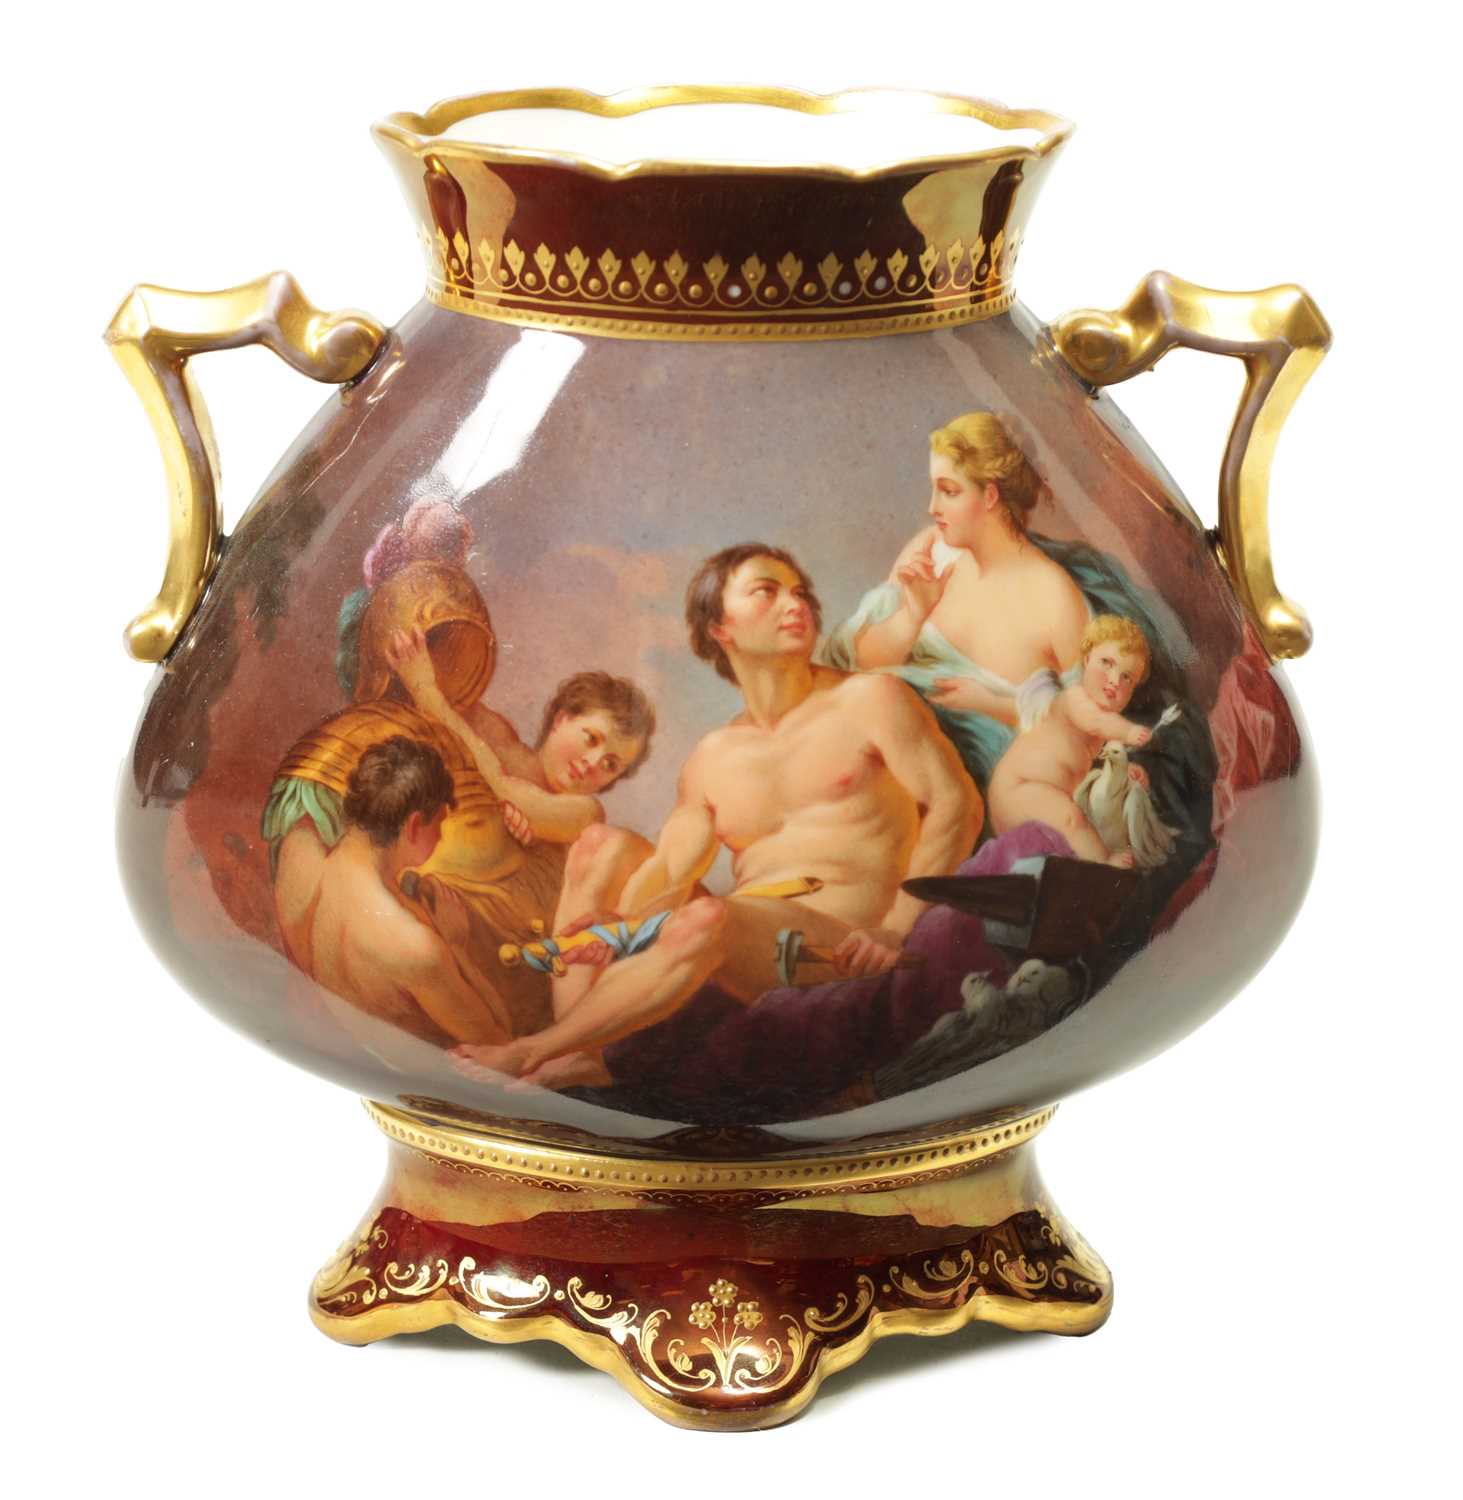 A LATE 19TH/EARLY 20TH CENTURY ‘VIENNA’ GILT TWO-HANDLED FLATTENED OVOID CABINET VASE